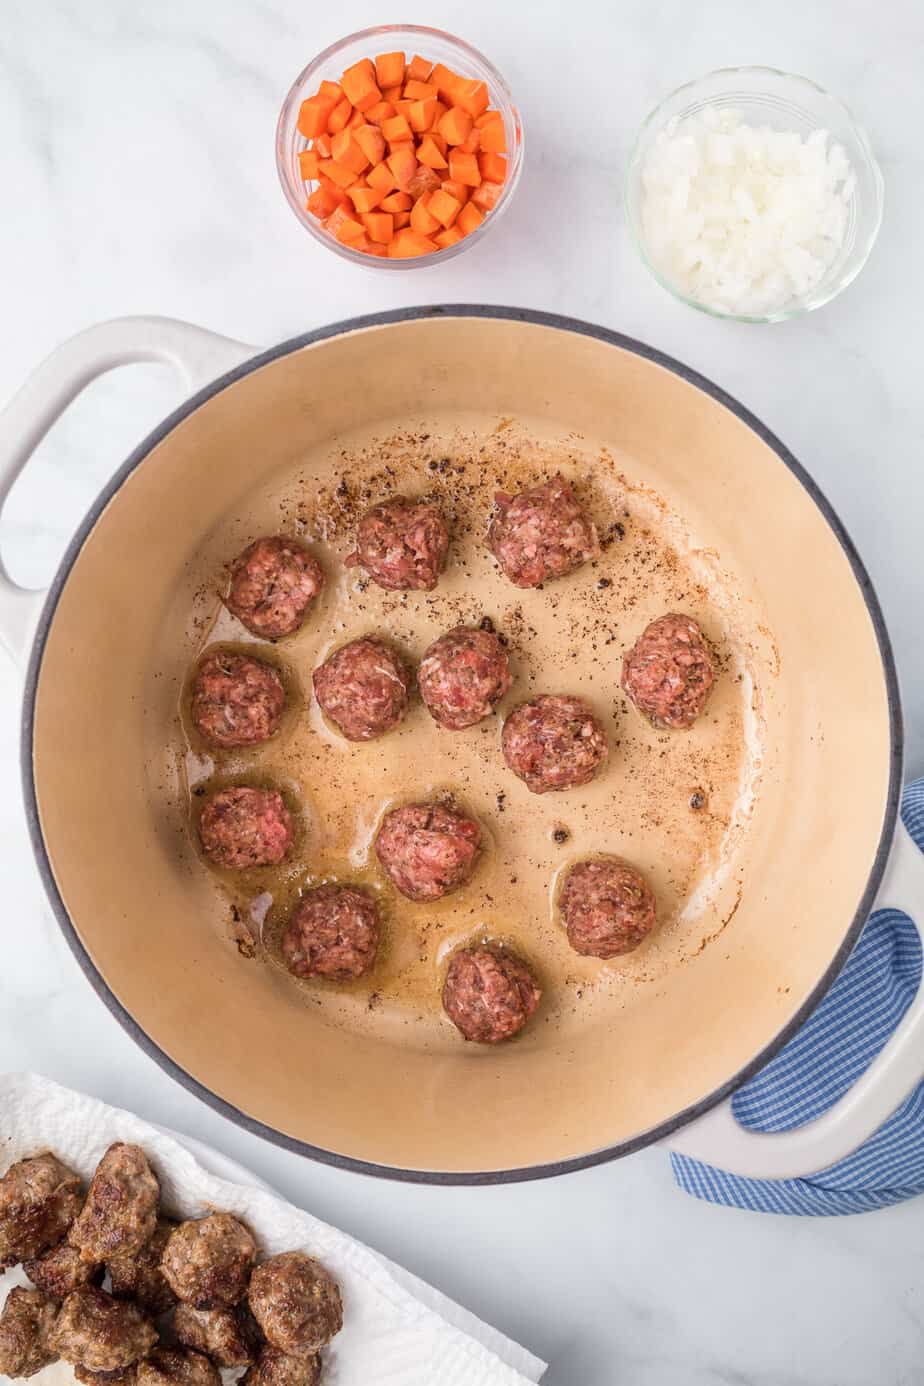 Browning meatballs in a pot from overhead on a counter with more cooked meatballs on a paper towel on a plate nearby.